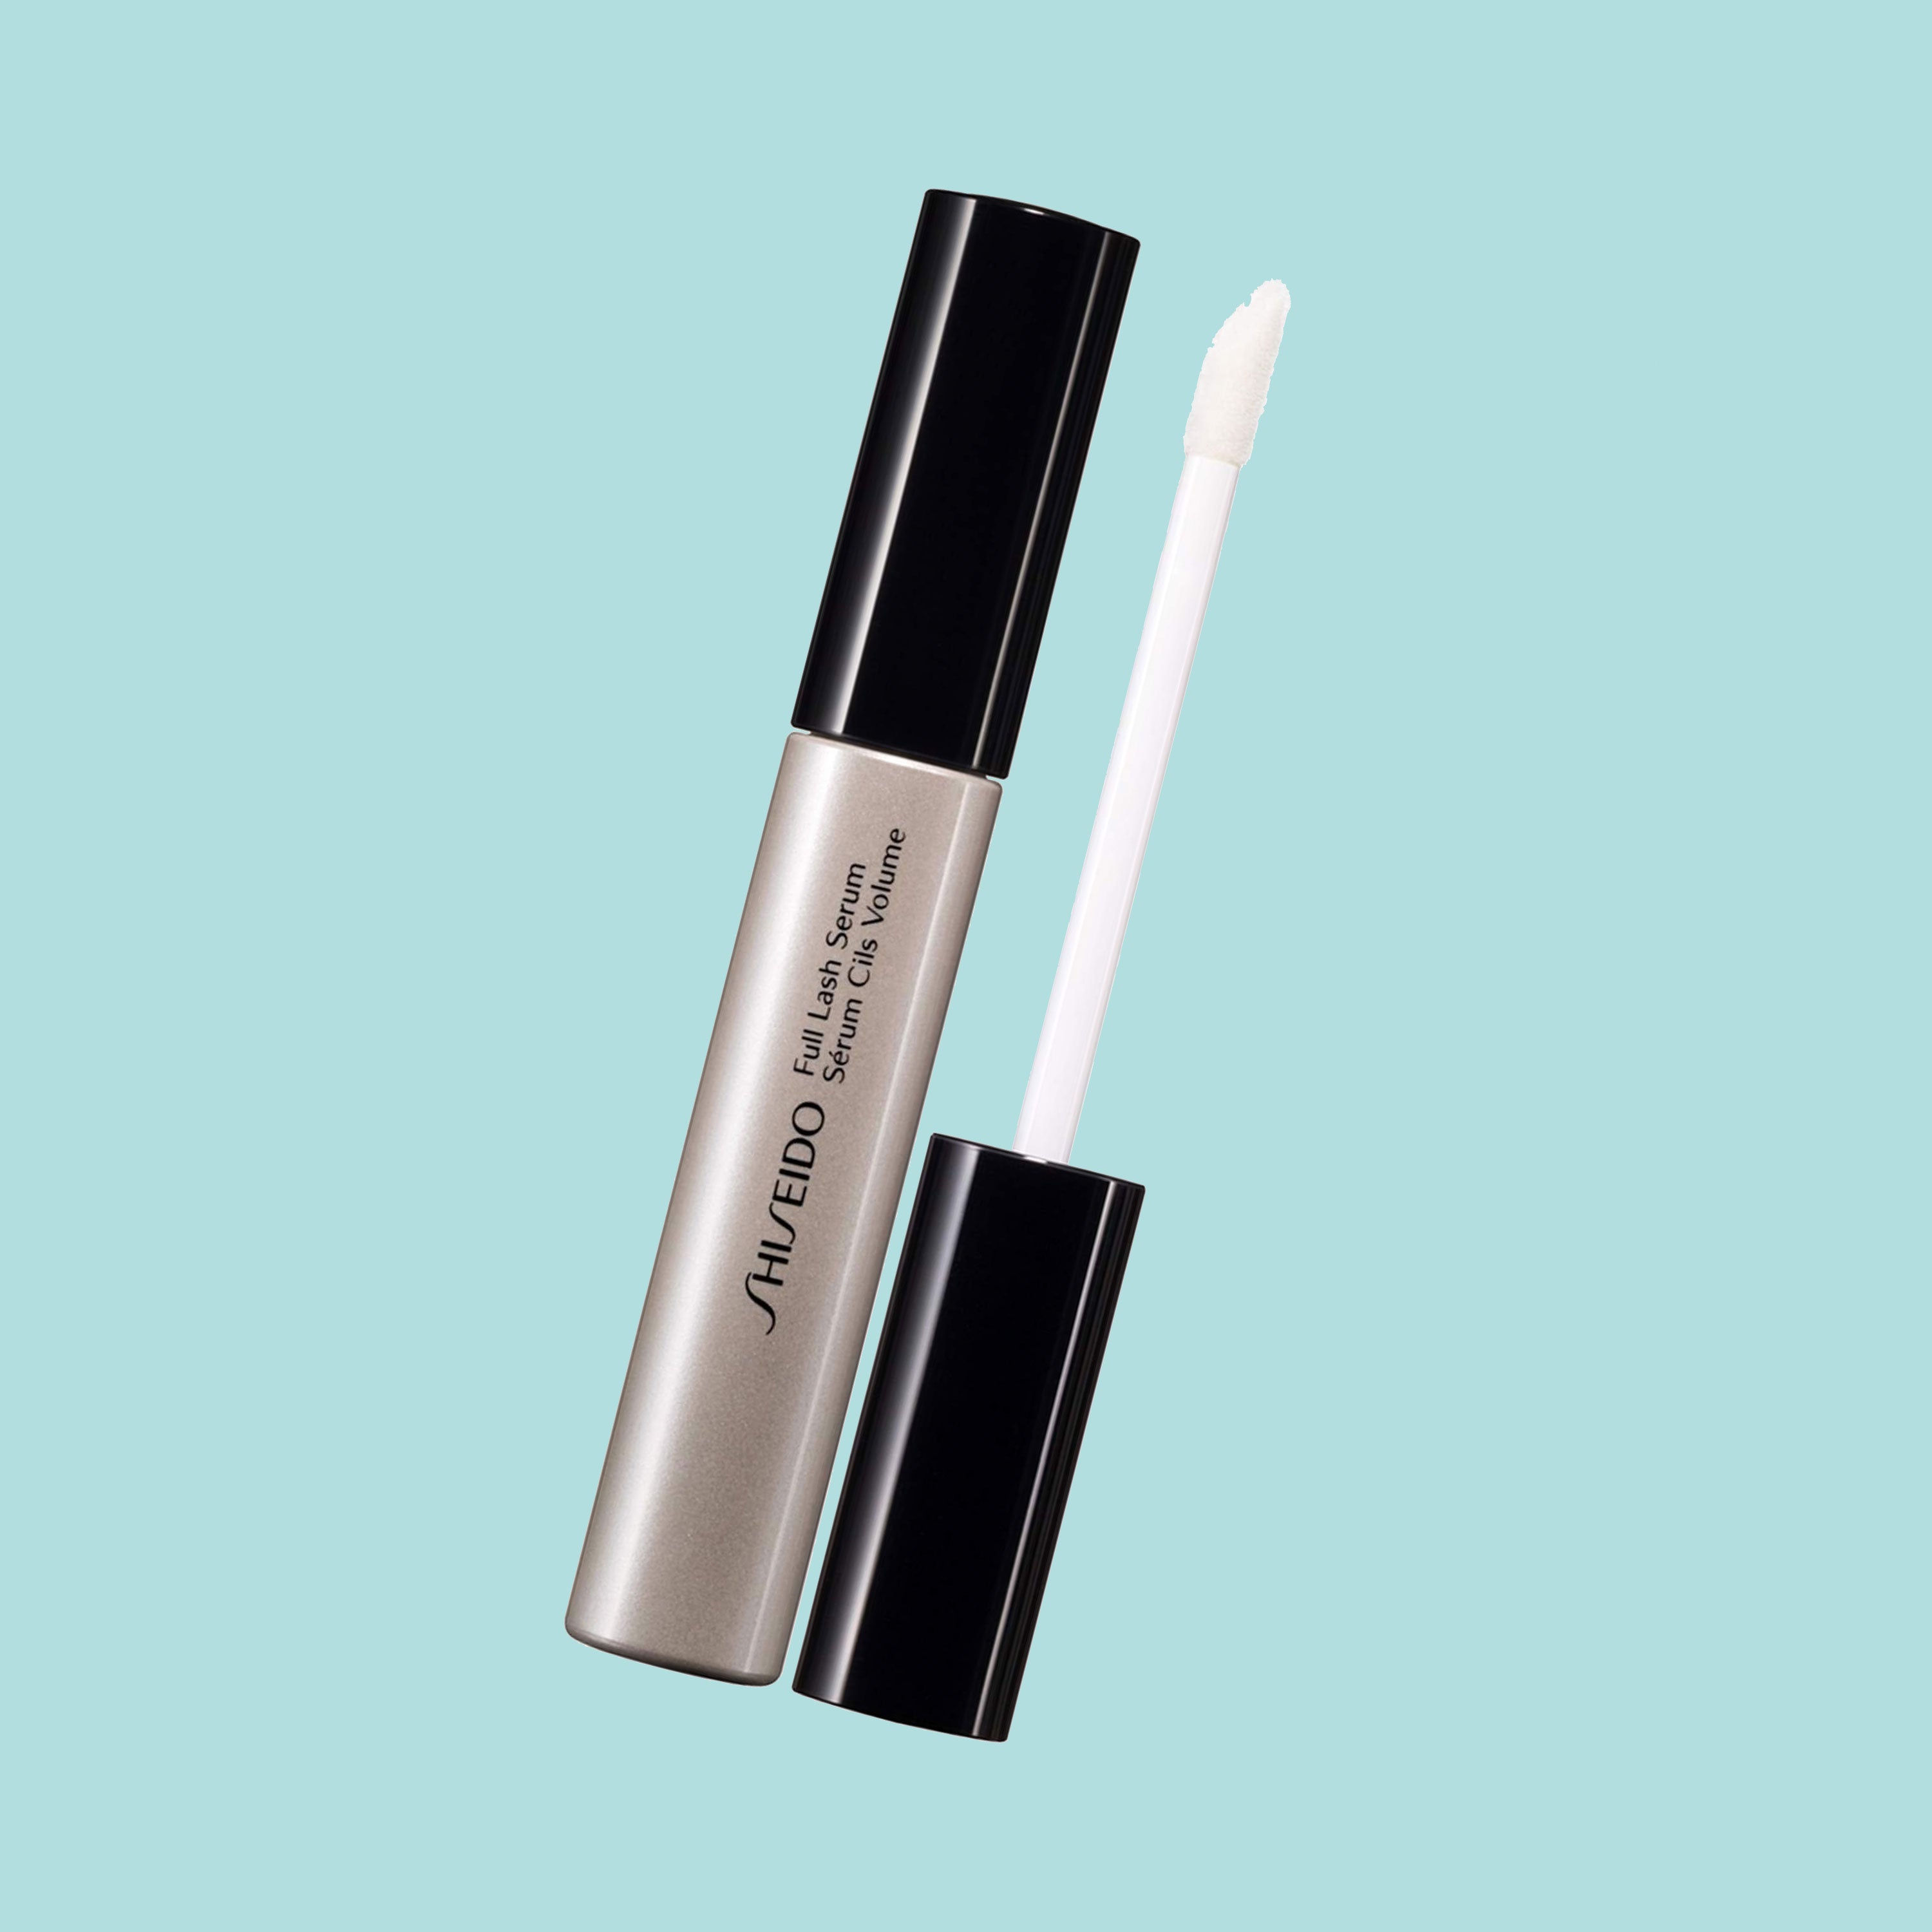 10 Growth Serums To Try For Fuller and Longer Lashes